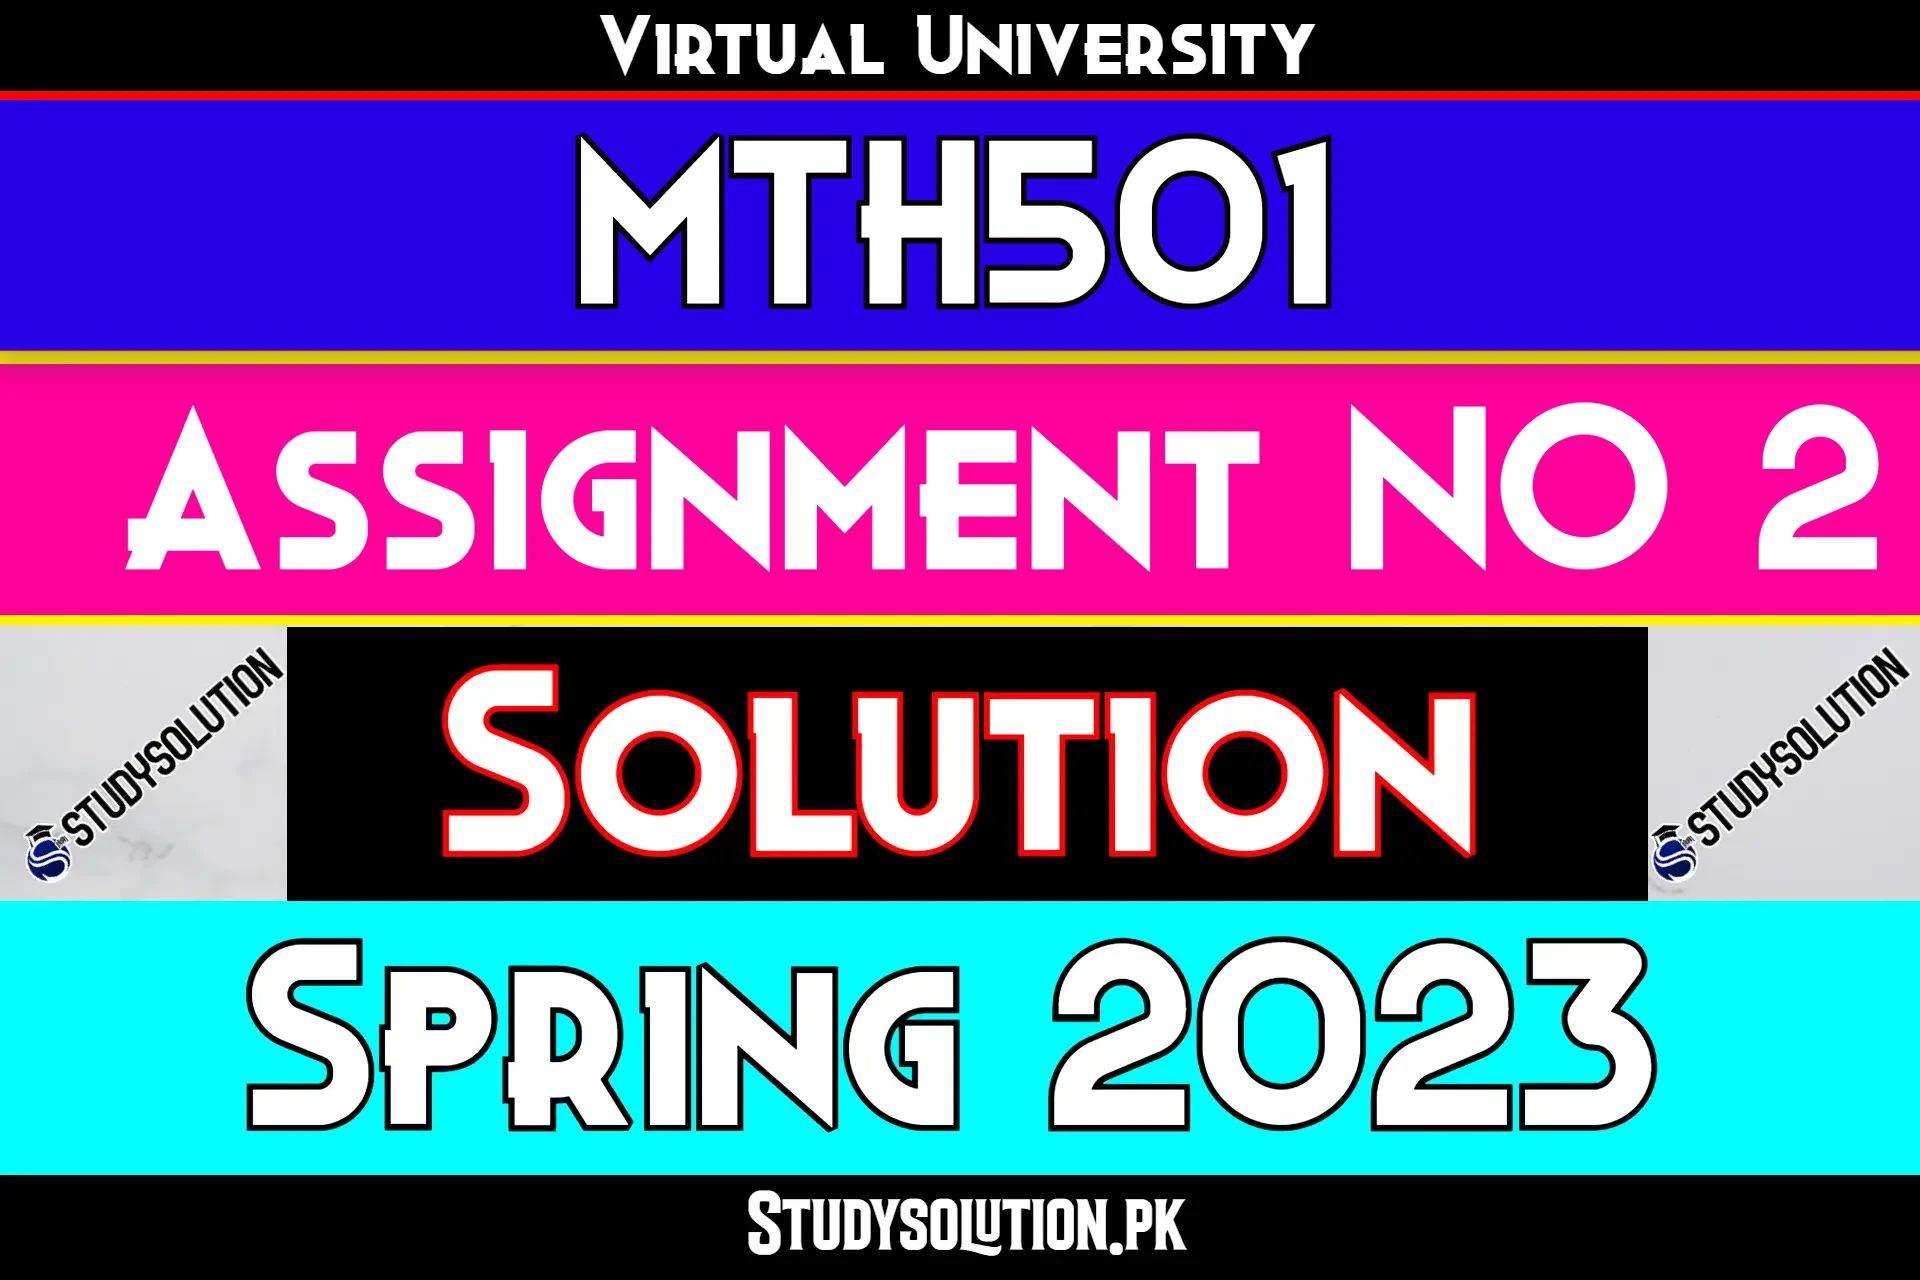 MTH501 Assignment No 2 Solution Spring 2023 